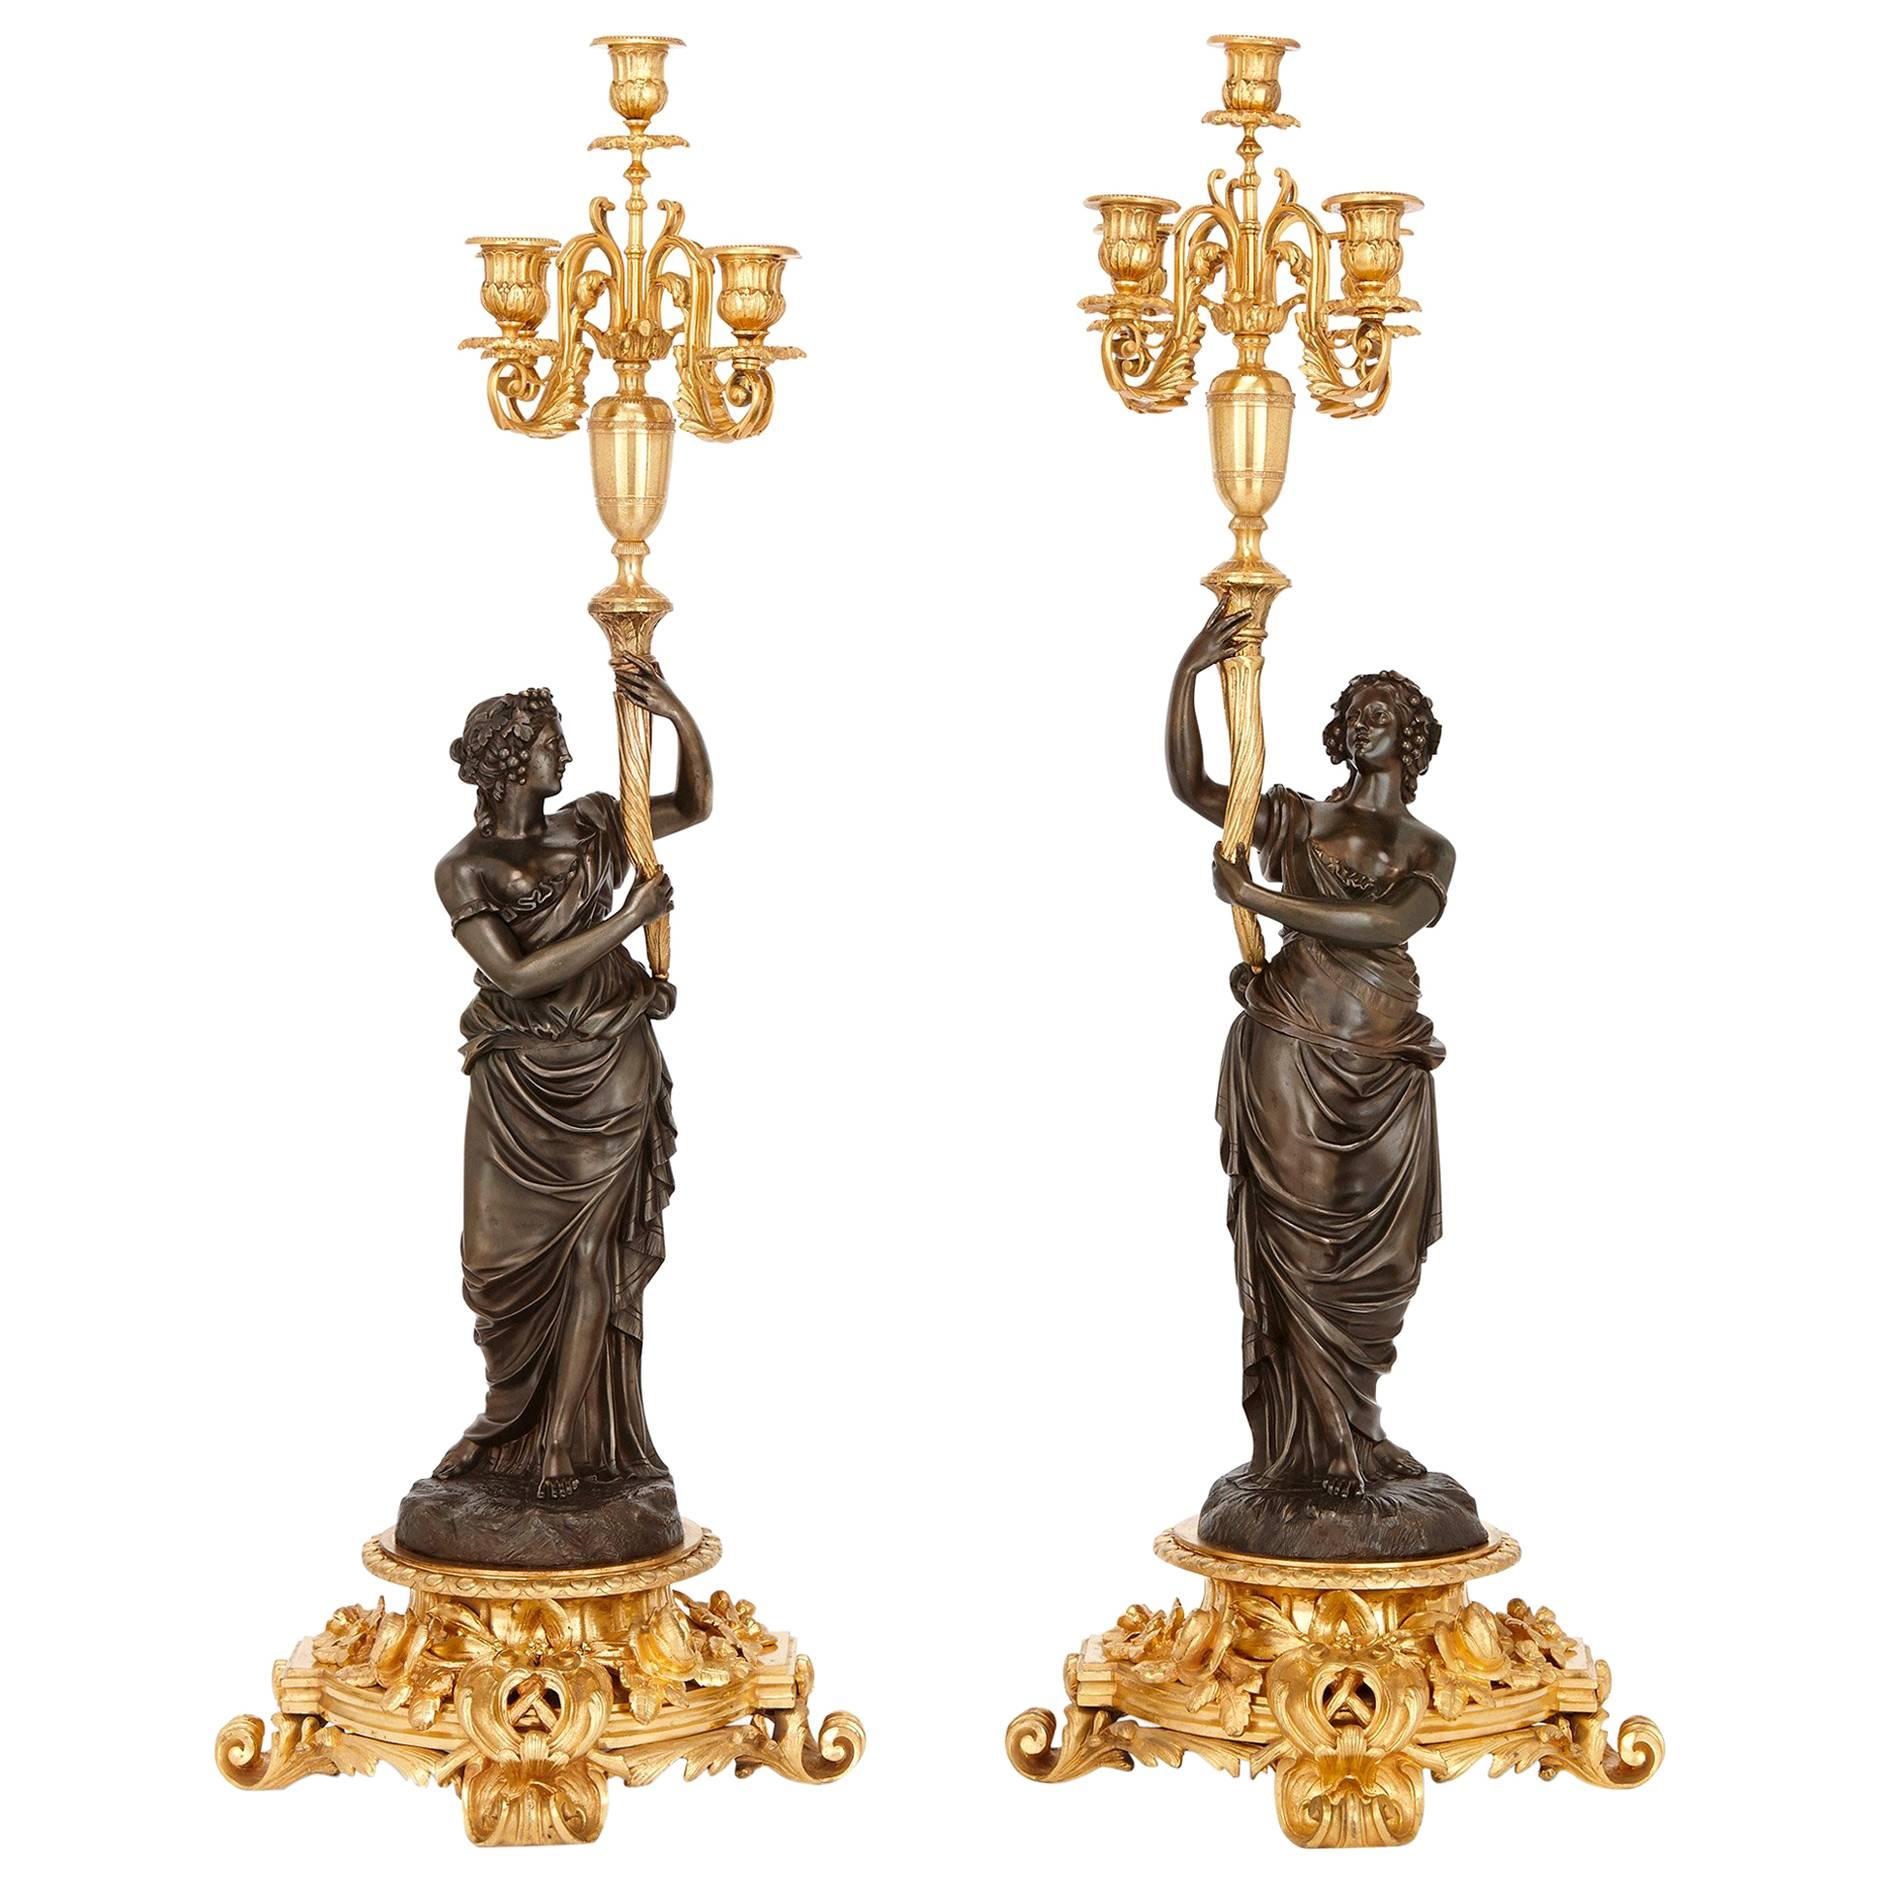 Pair of Large Neoclassical Style Gilt and Patinated Bronze Candelabra by Picard